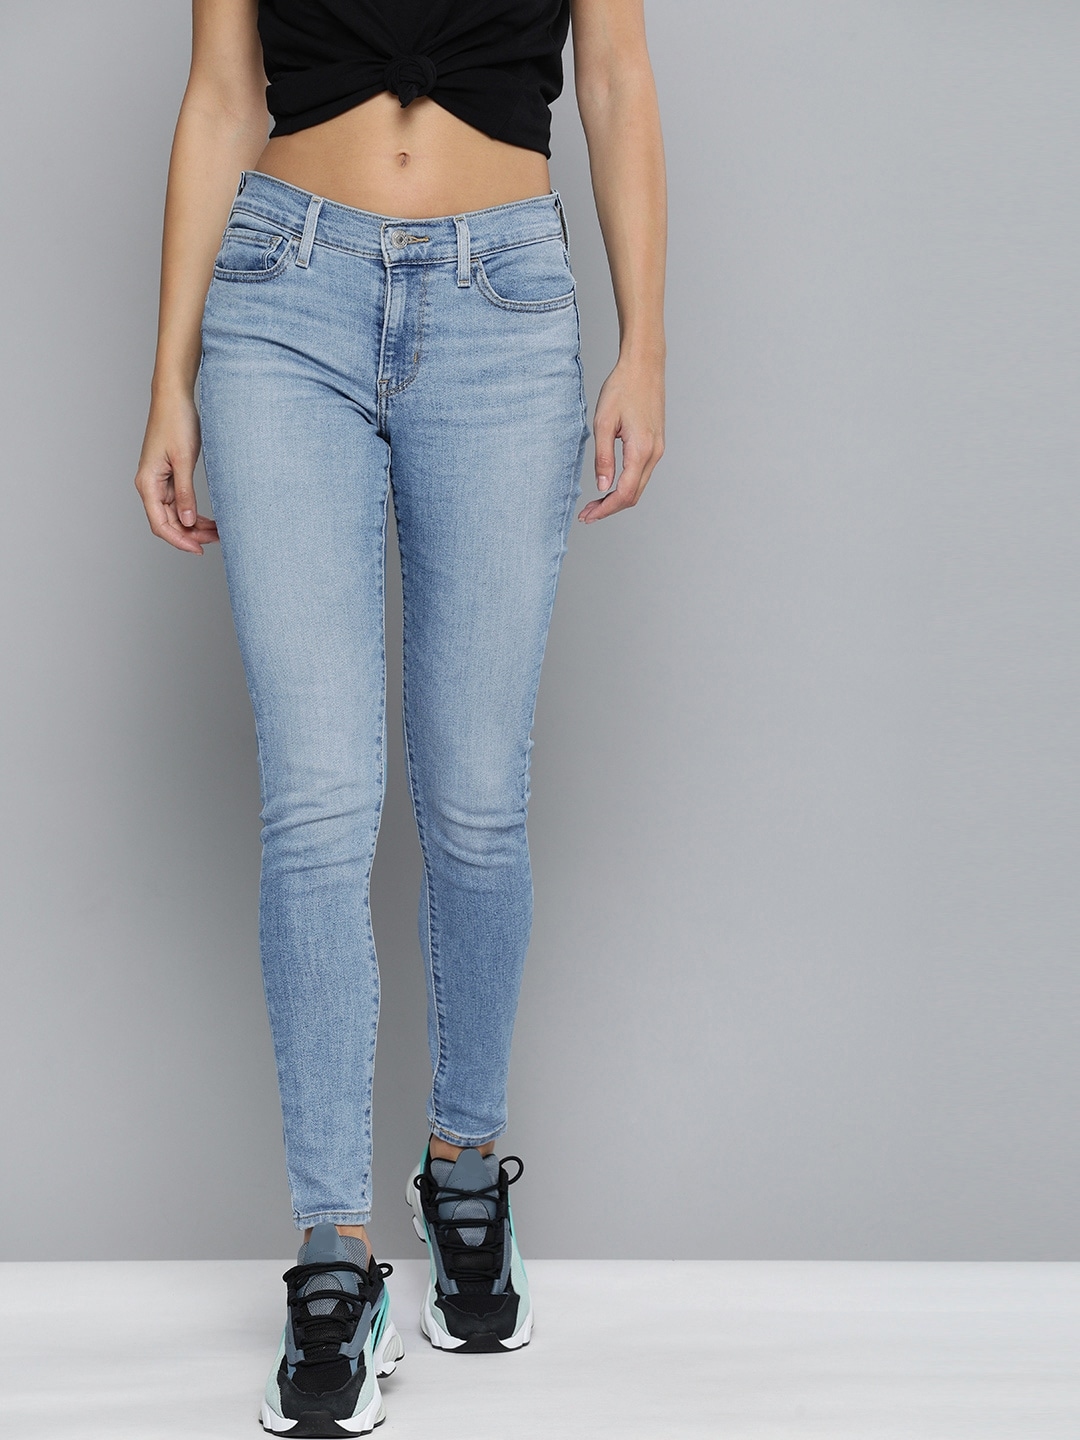 Buy Levis Women Blue 710 Super Skinny Fit Light Fade Mid Rise Clean Look Stretchable Jeans 